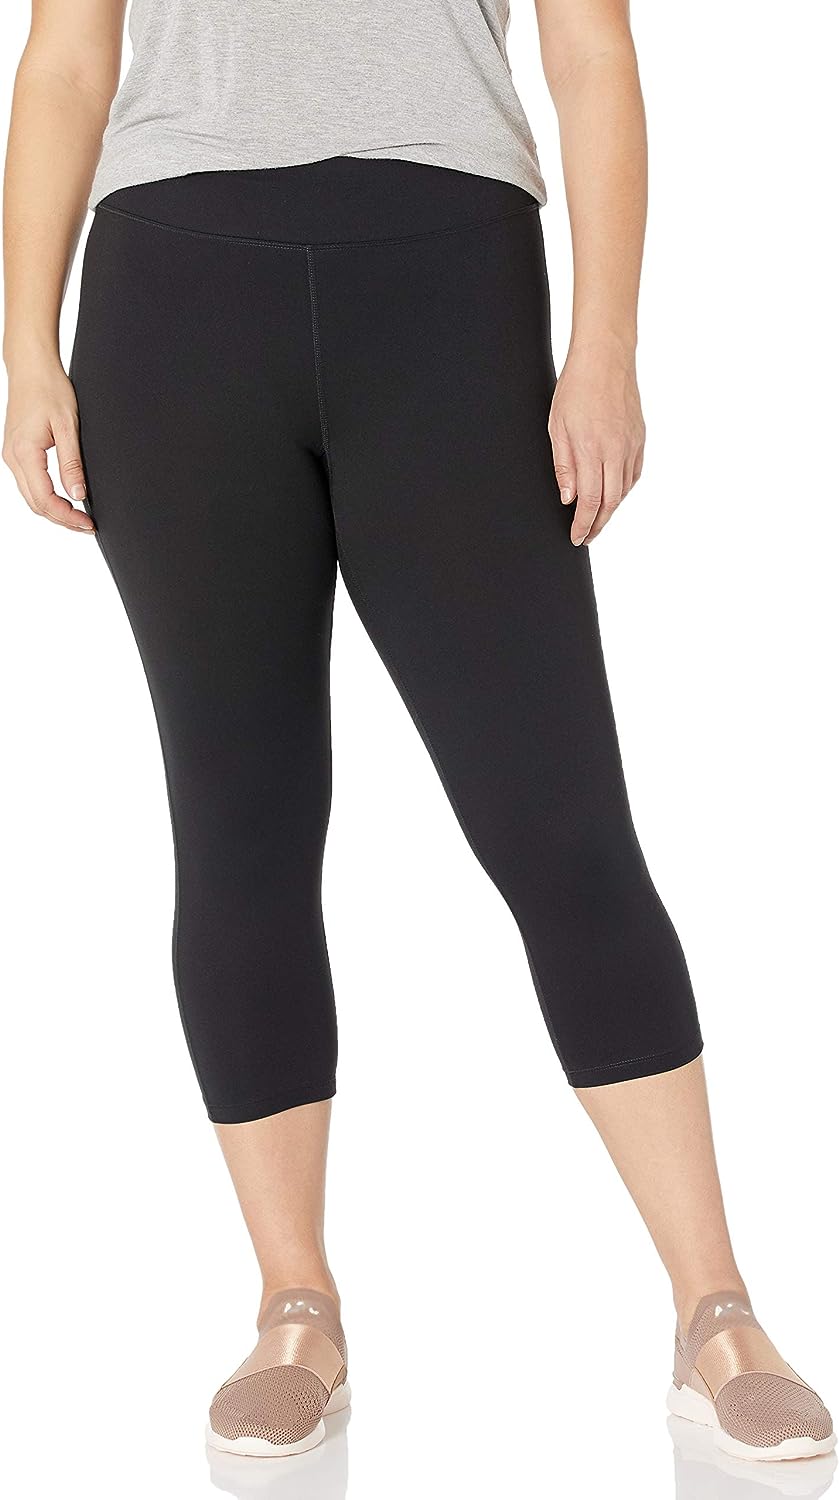 JUST MY SIZE Women's Plus Size Active Stretch Capri Review